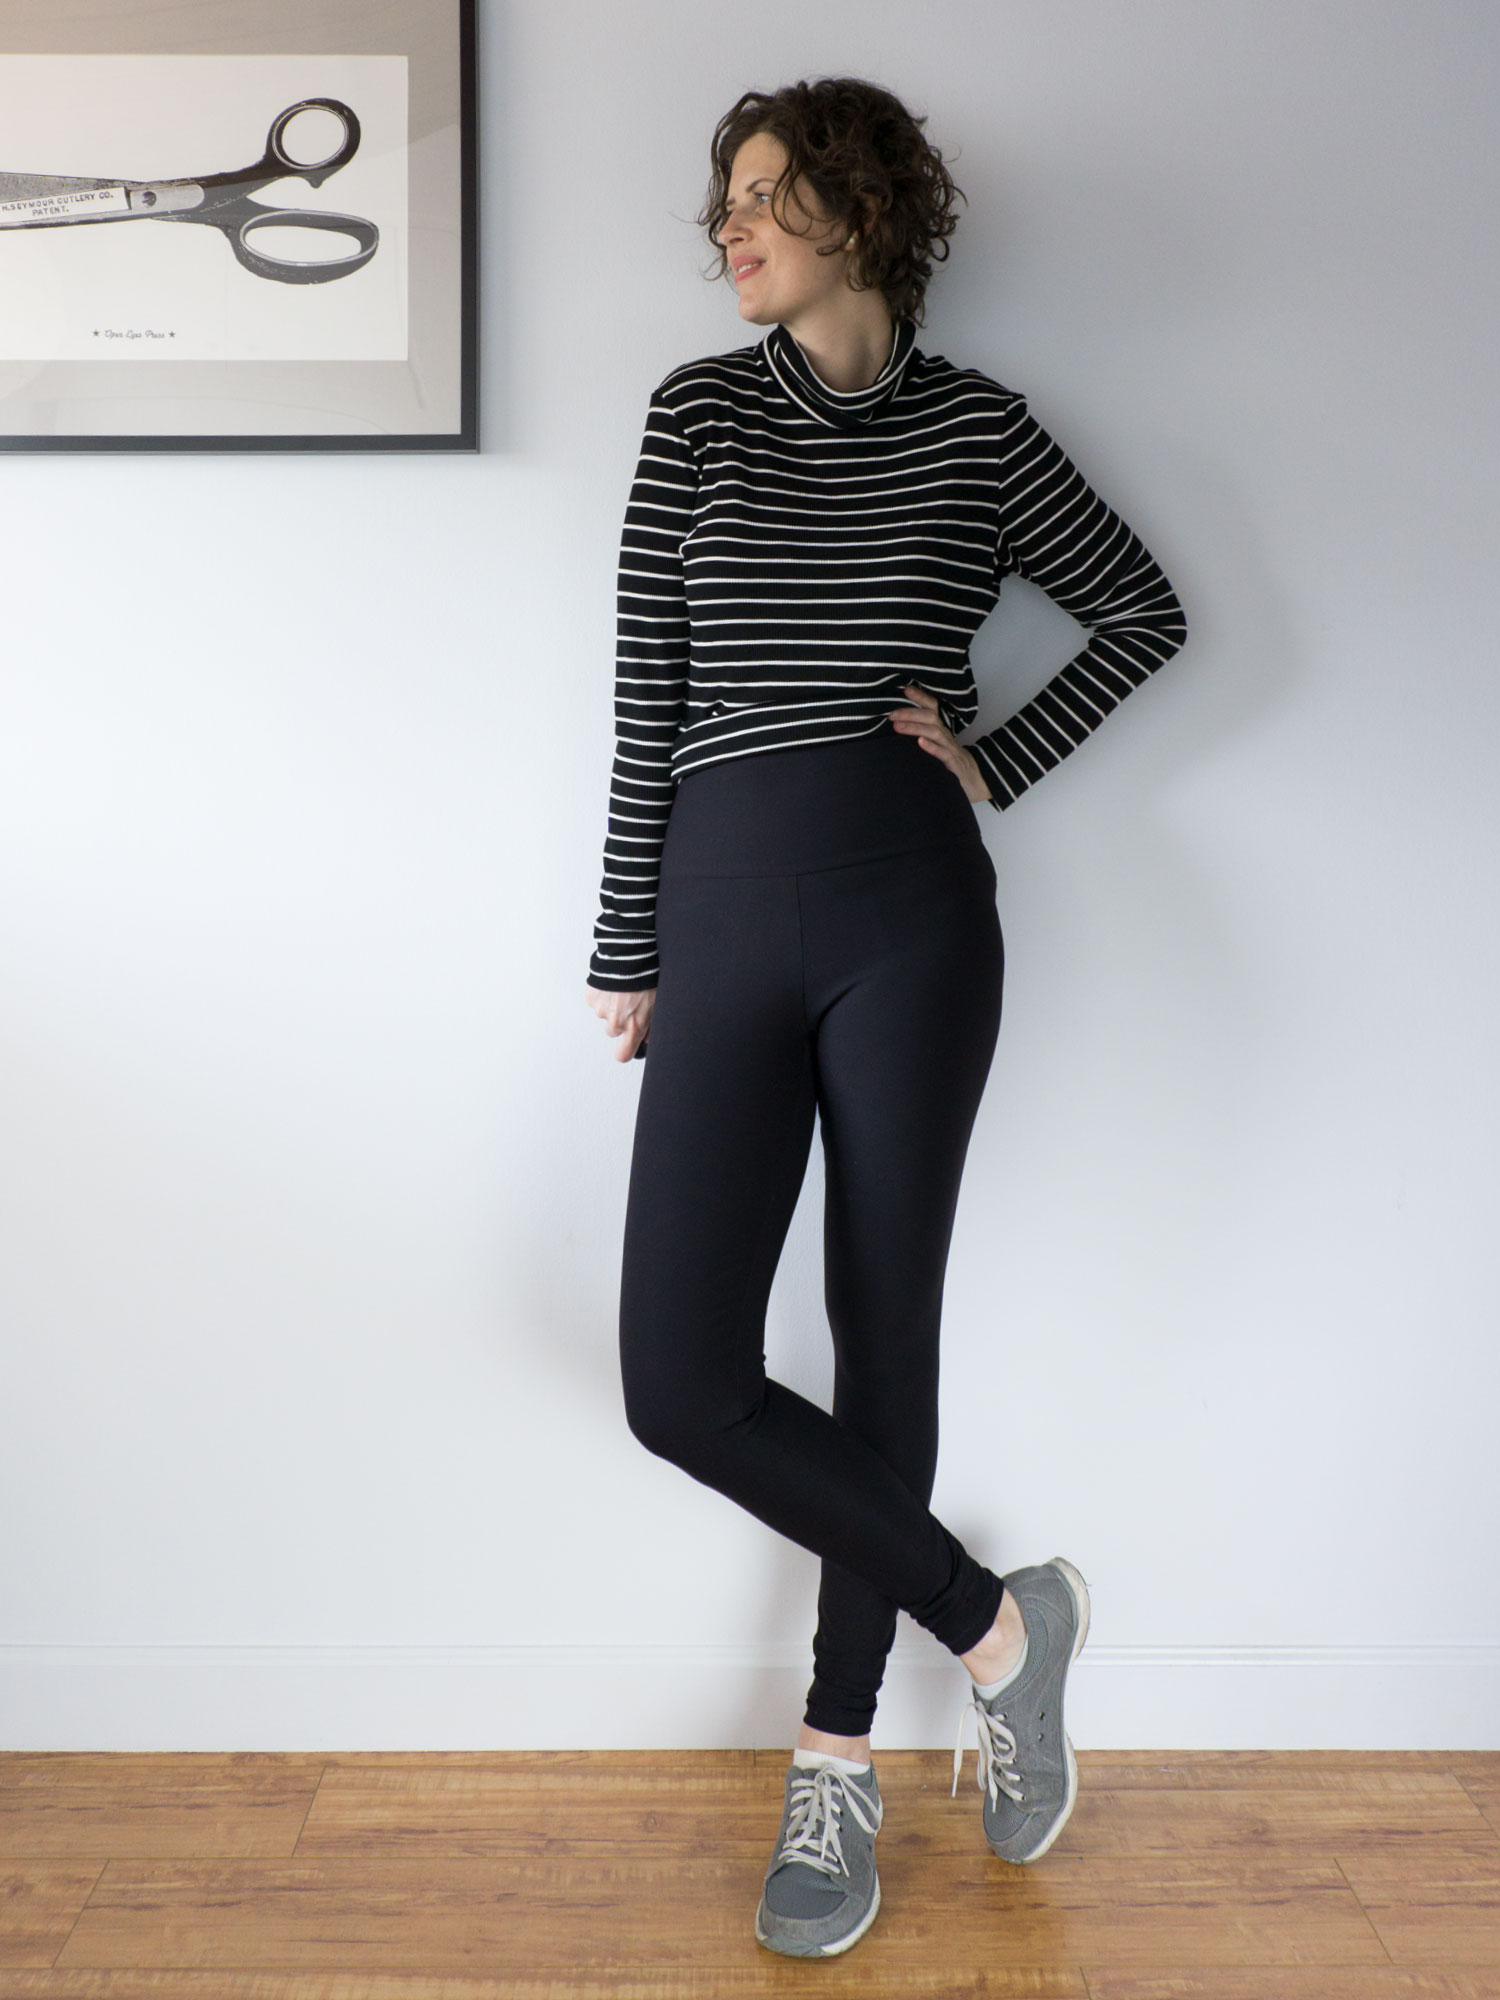 DIY Compression Leggings – Review of the Avery Leggings pattern by